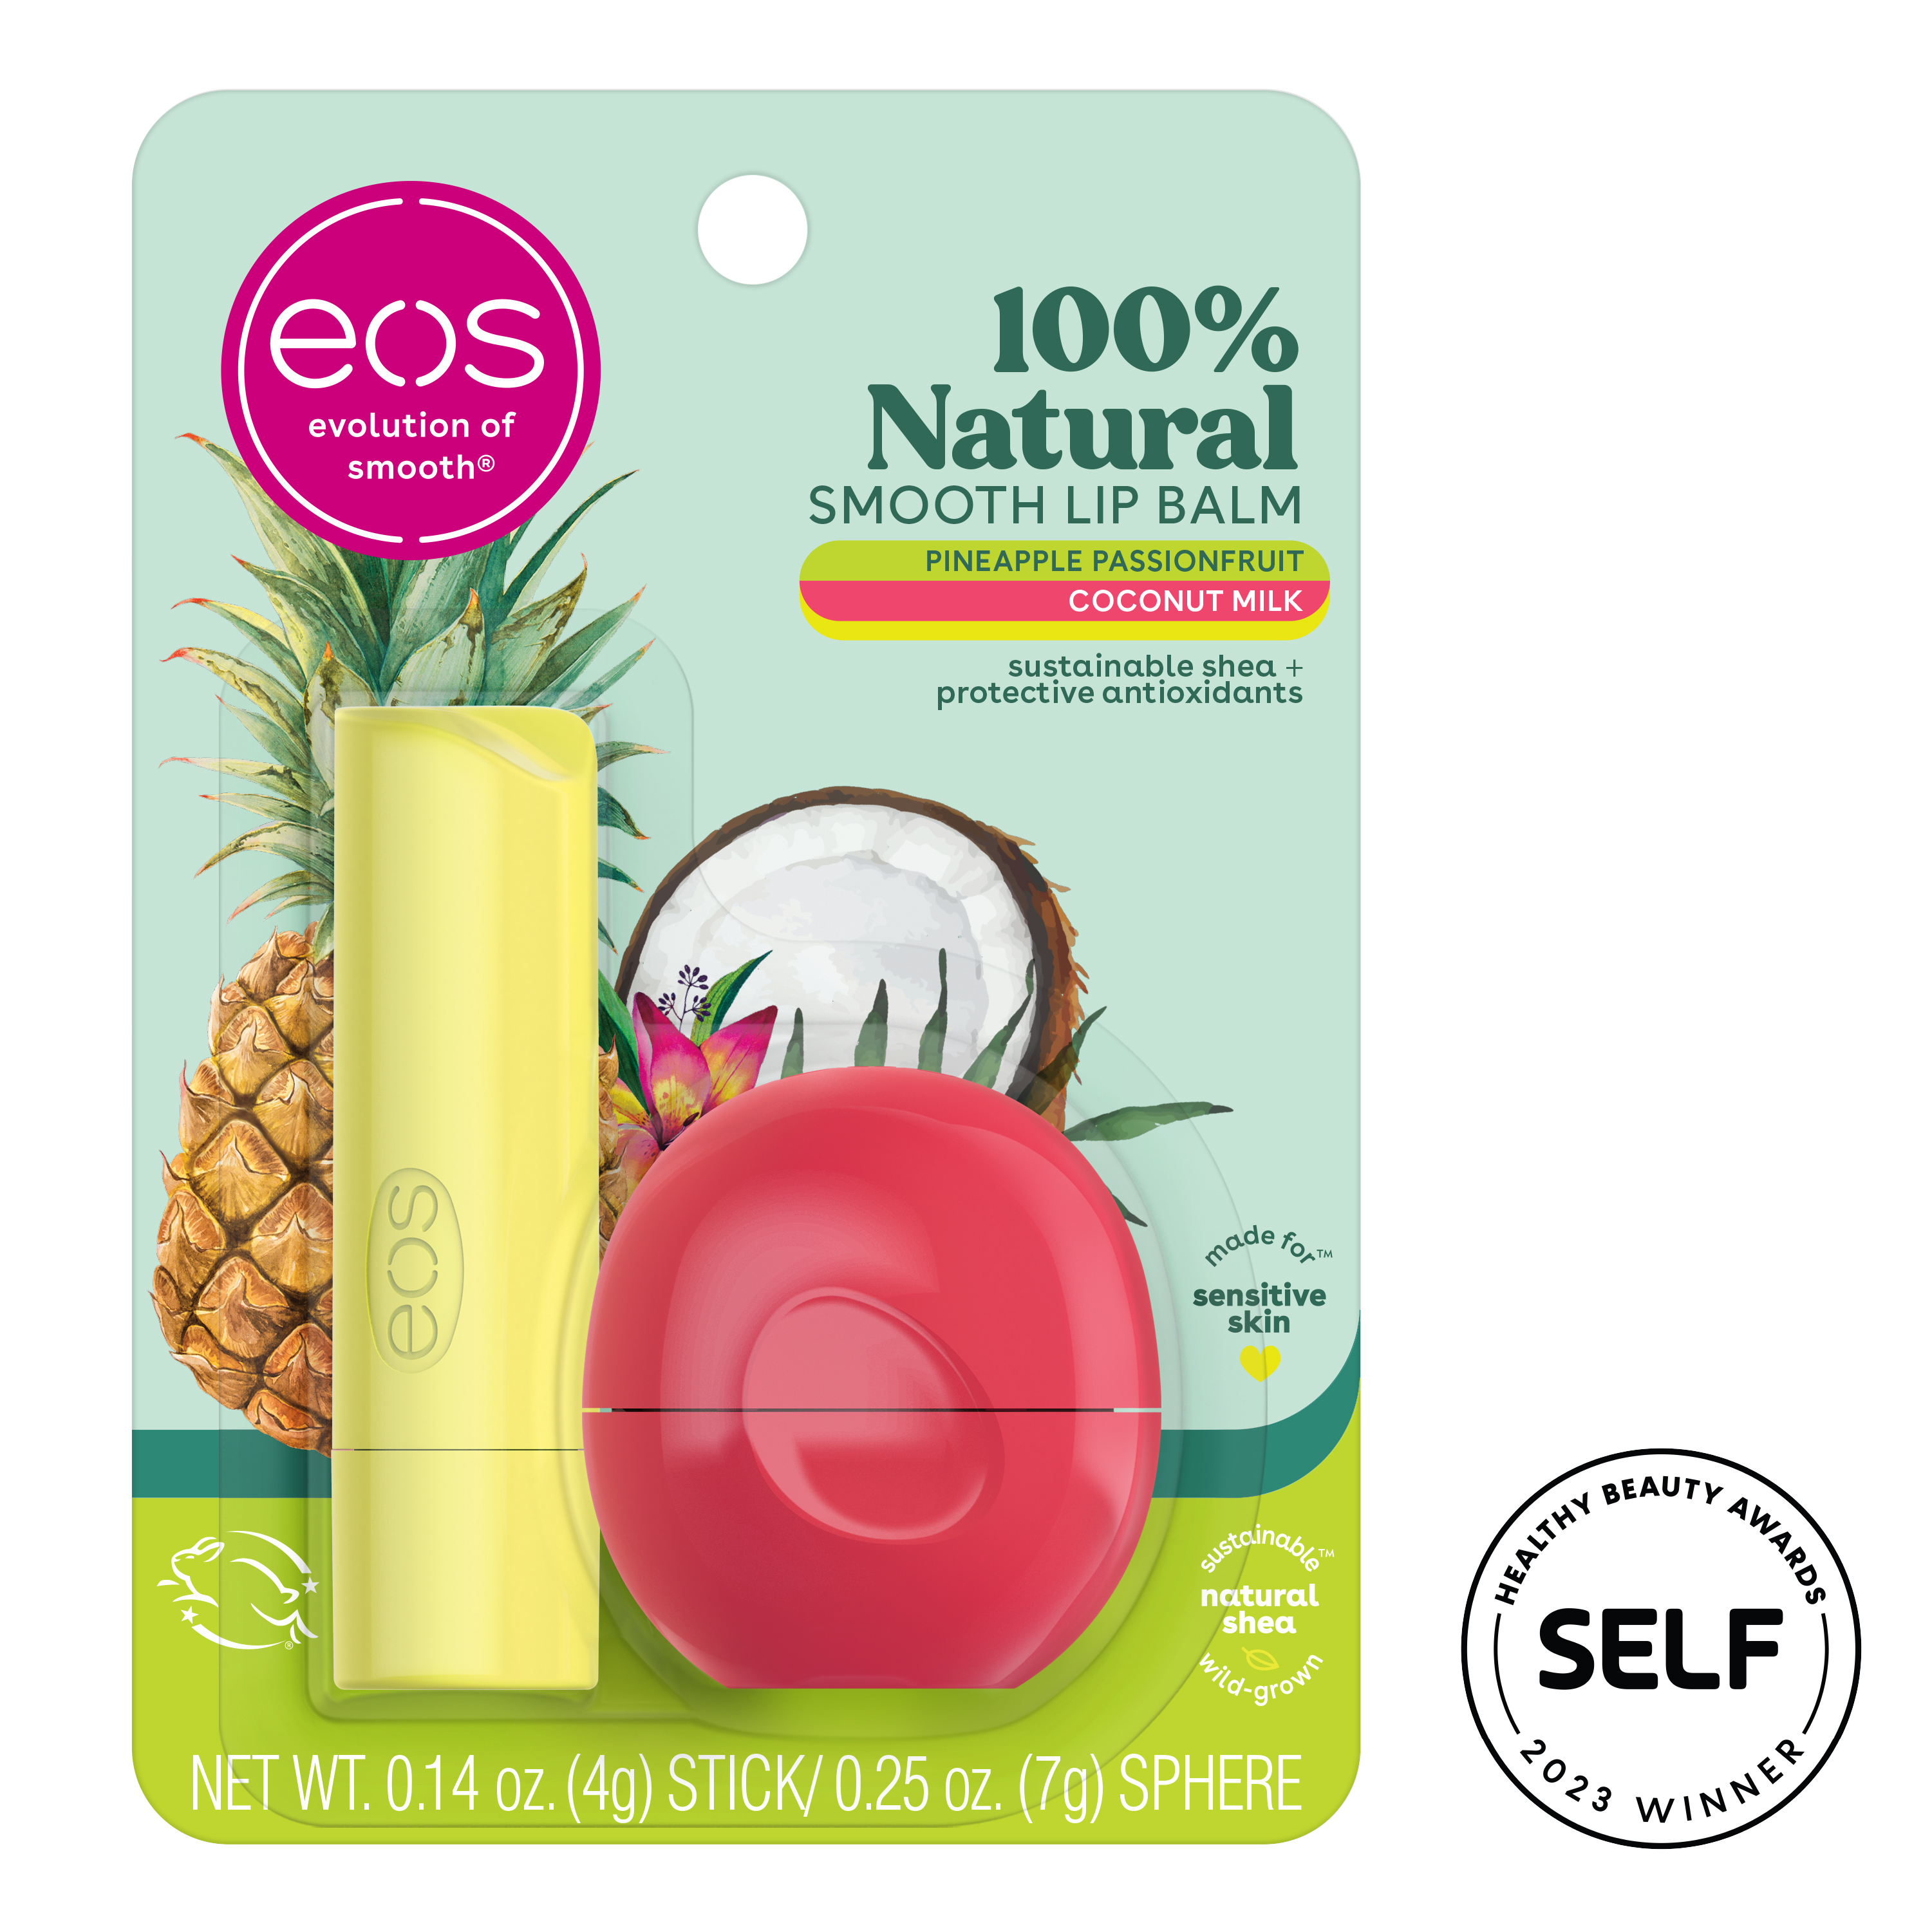 Eos 100% Natural Lip Balm- Pineapple Passionfruit & Coconut Milk, 0.39 oz, 2-Pack - image 1 of 8